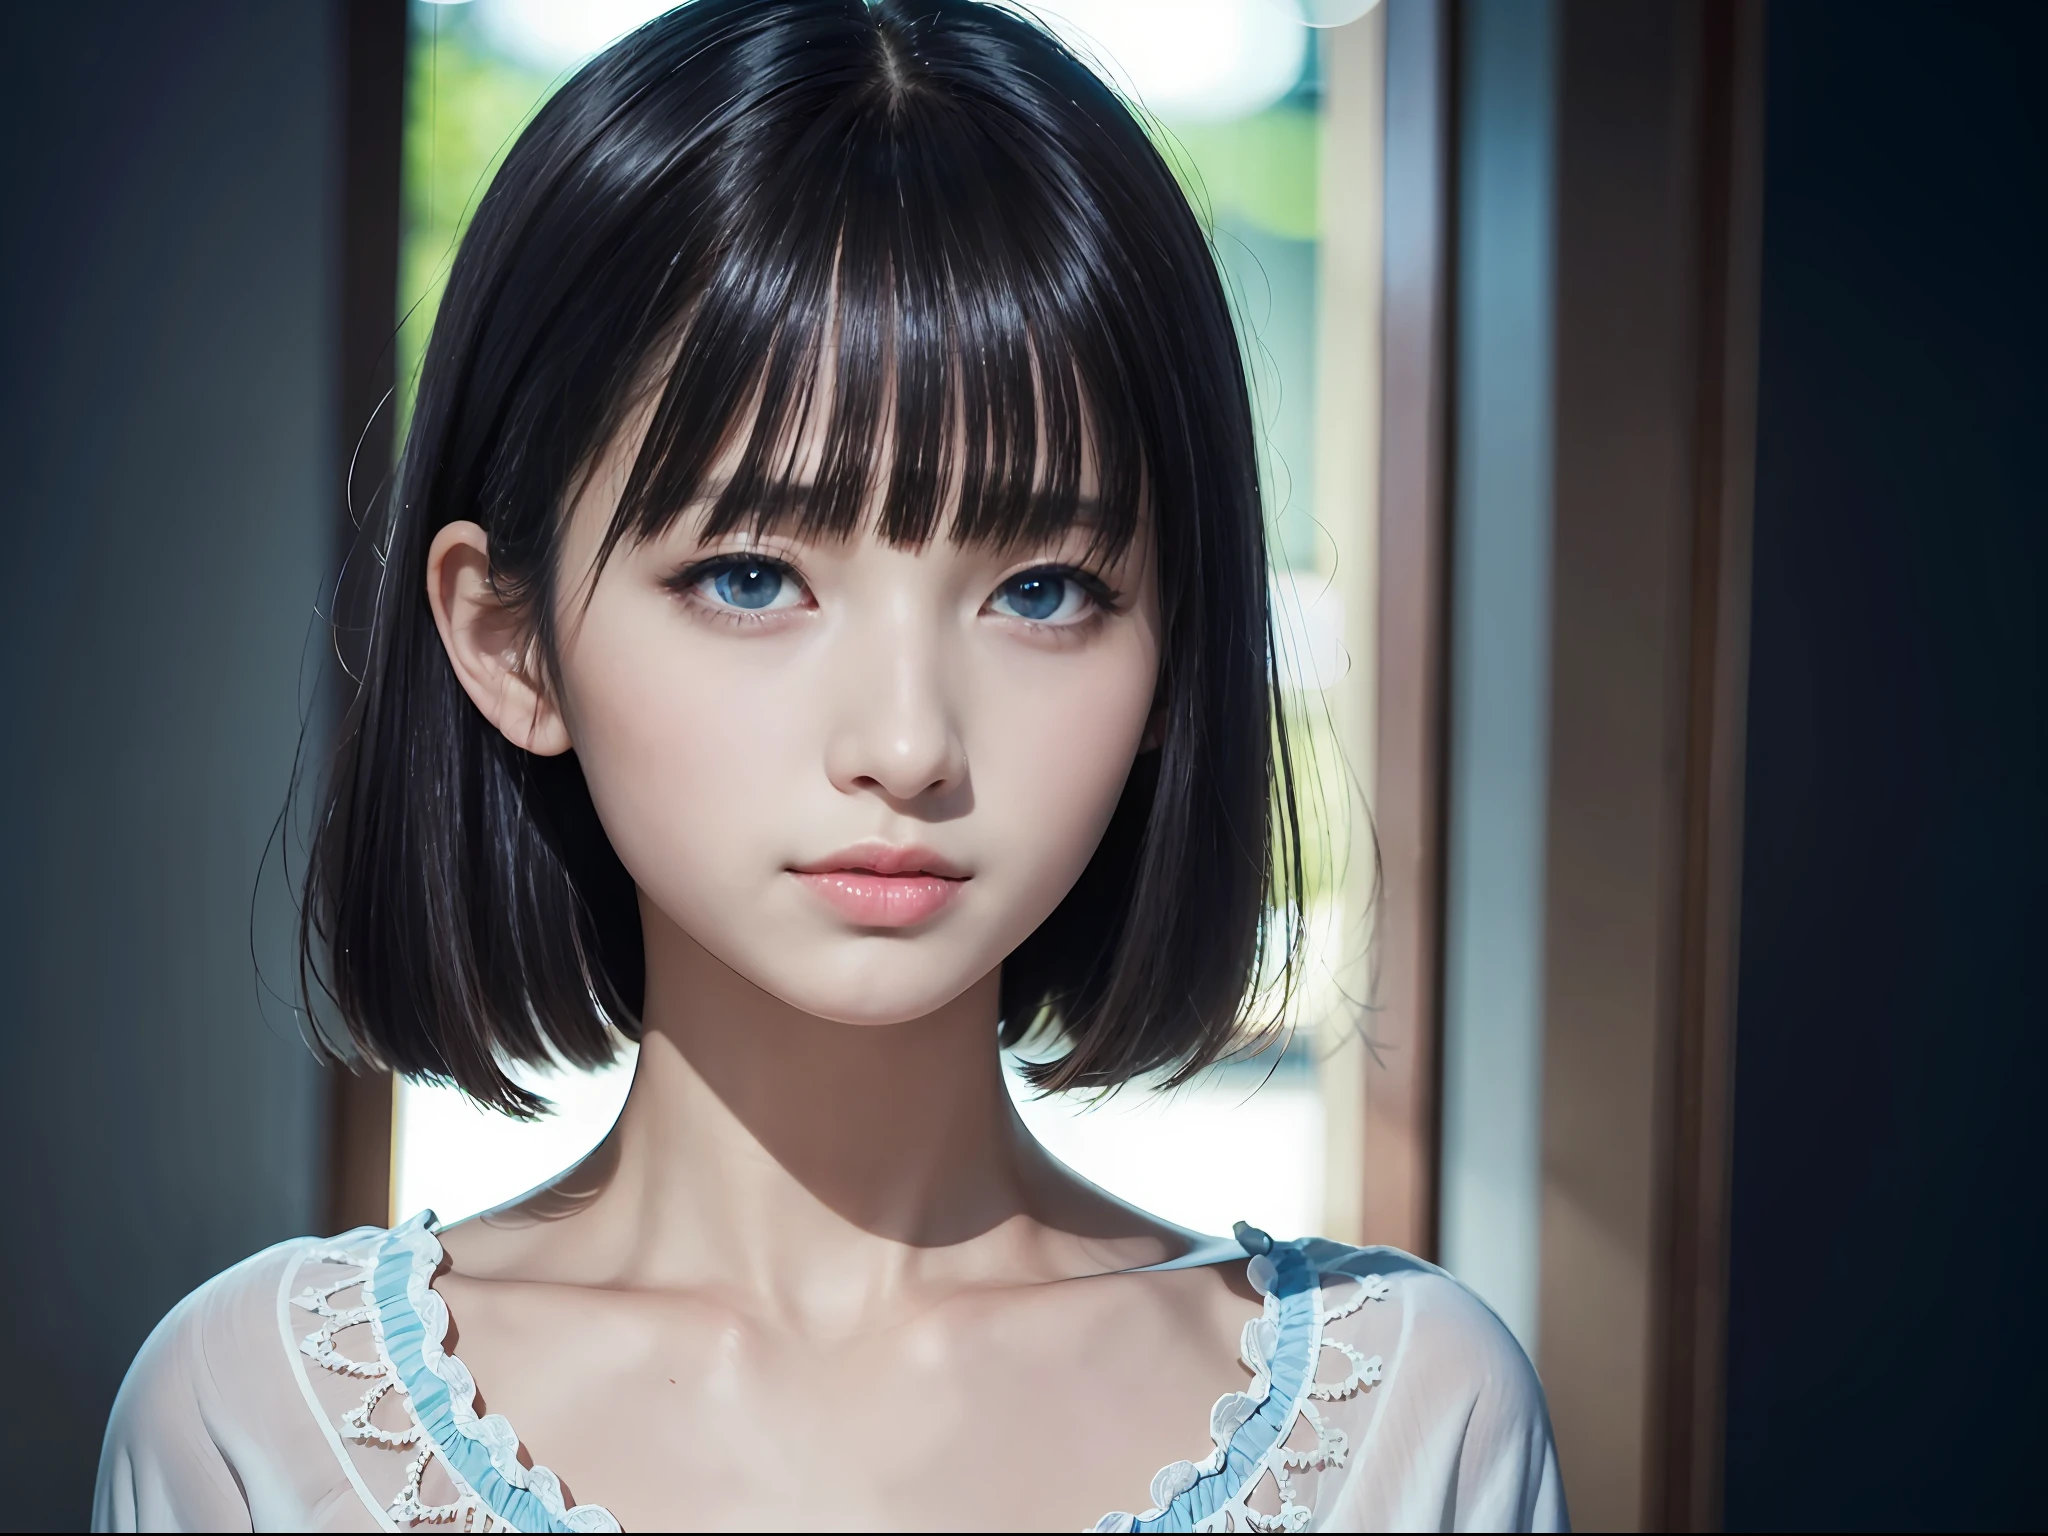 8K, Best Quality, 1girl, Masterpiece,8K, (Night, Upper Body:1.5),Withdrawn Camera POV, 15 years old,Beautiful girl,Expressionless,Look at the front,(More bangs:1.5),White blouse, (Shorts:1.1), (Bob-cut hair:1.2) , (Closed mouth:1.2, Blue eyes, High nose, Beautiful sharp face) ,(Wonderfully beautiful eyes:1.4) ,No makeup, Dark atmosphere ,Dismal,Perspective, Depth of Field, Ultra Realistic, High Resolution, Photography, Sharp Focus, HDR, Face Light, Dynamic Lighting, Maximum Detail, Extreme Detail, Ultra Detail, Detail, Real Skin, Delicate Facial Features